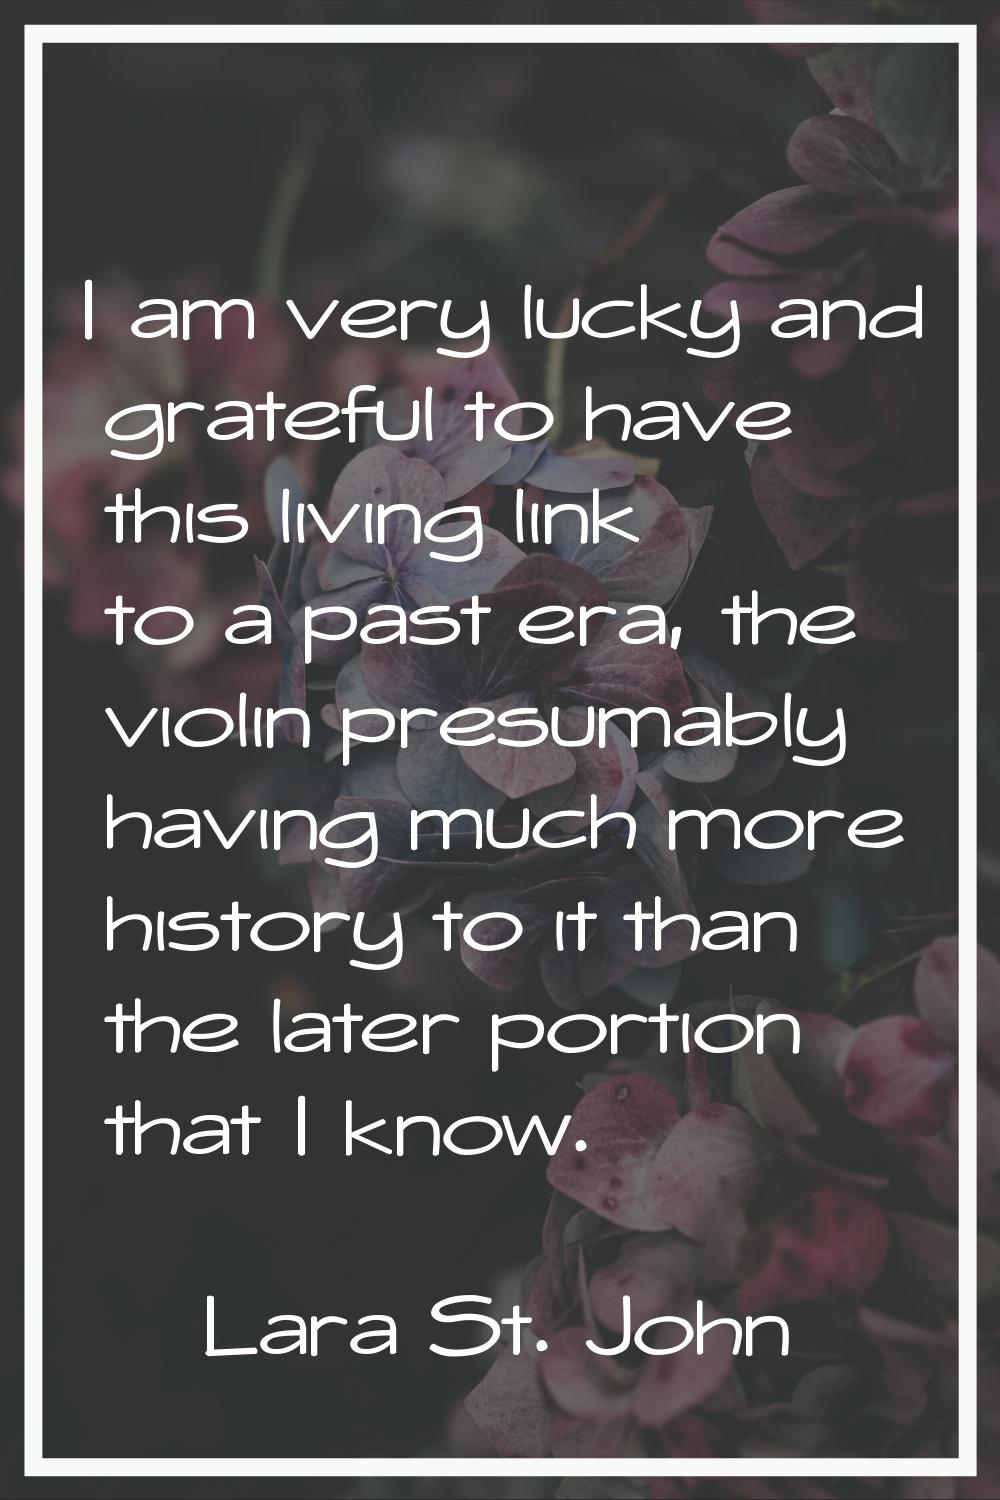 I am very lucky and grateful to have this living link to a past era, the violin presumably having m